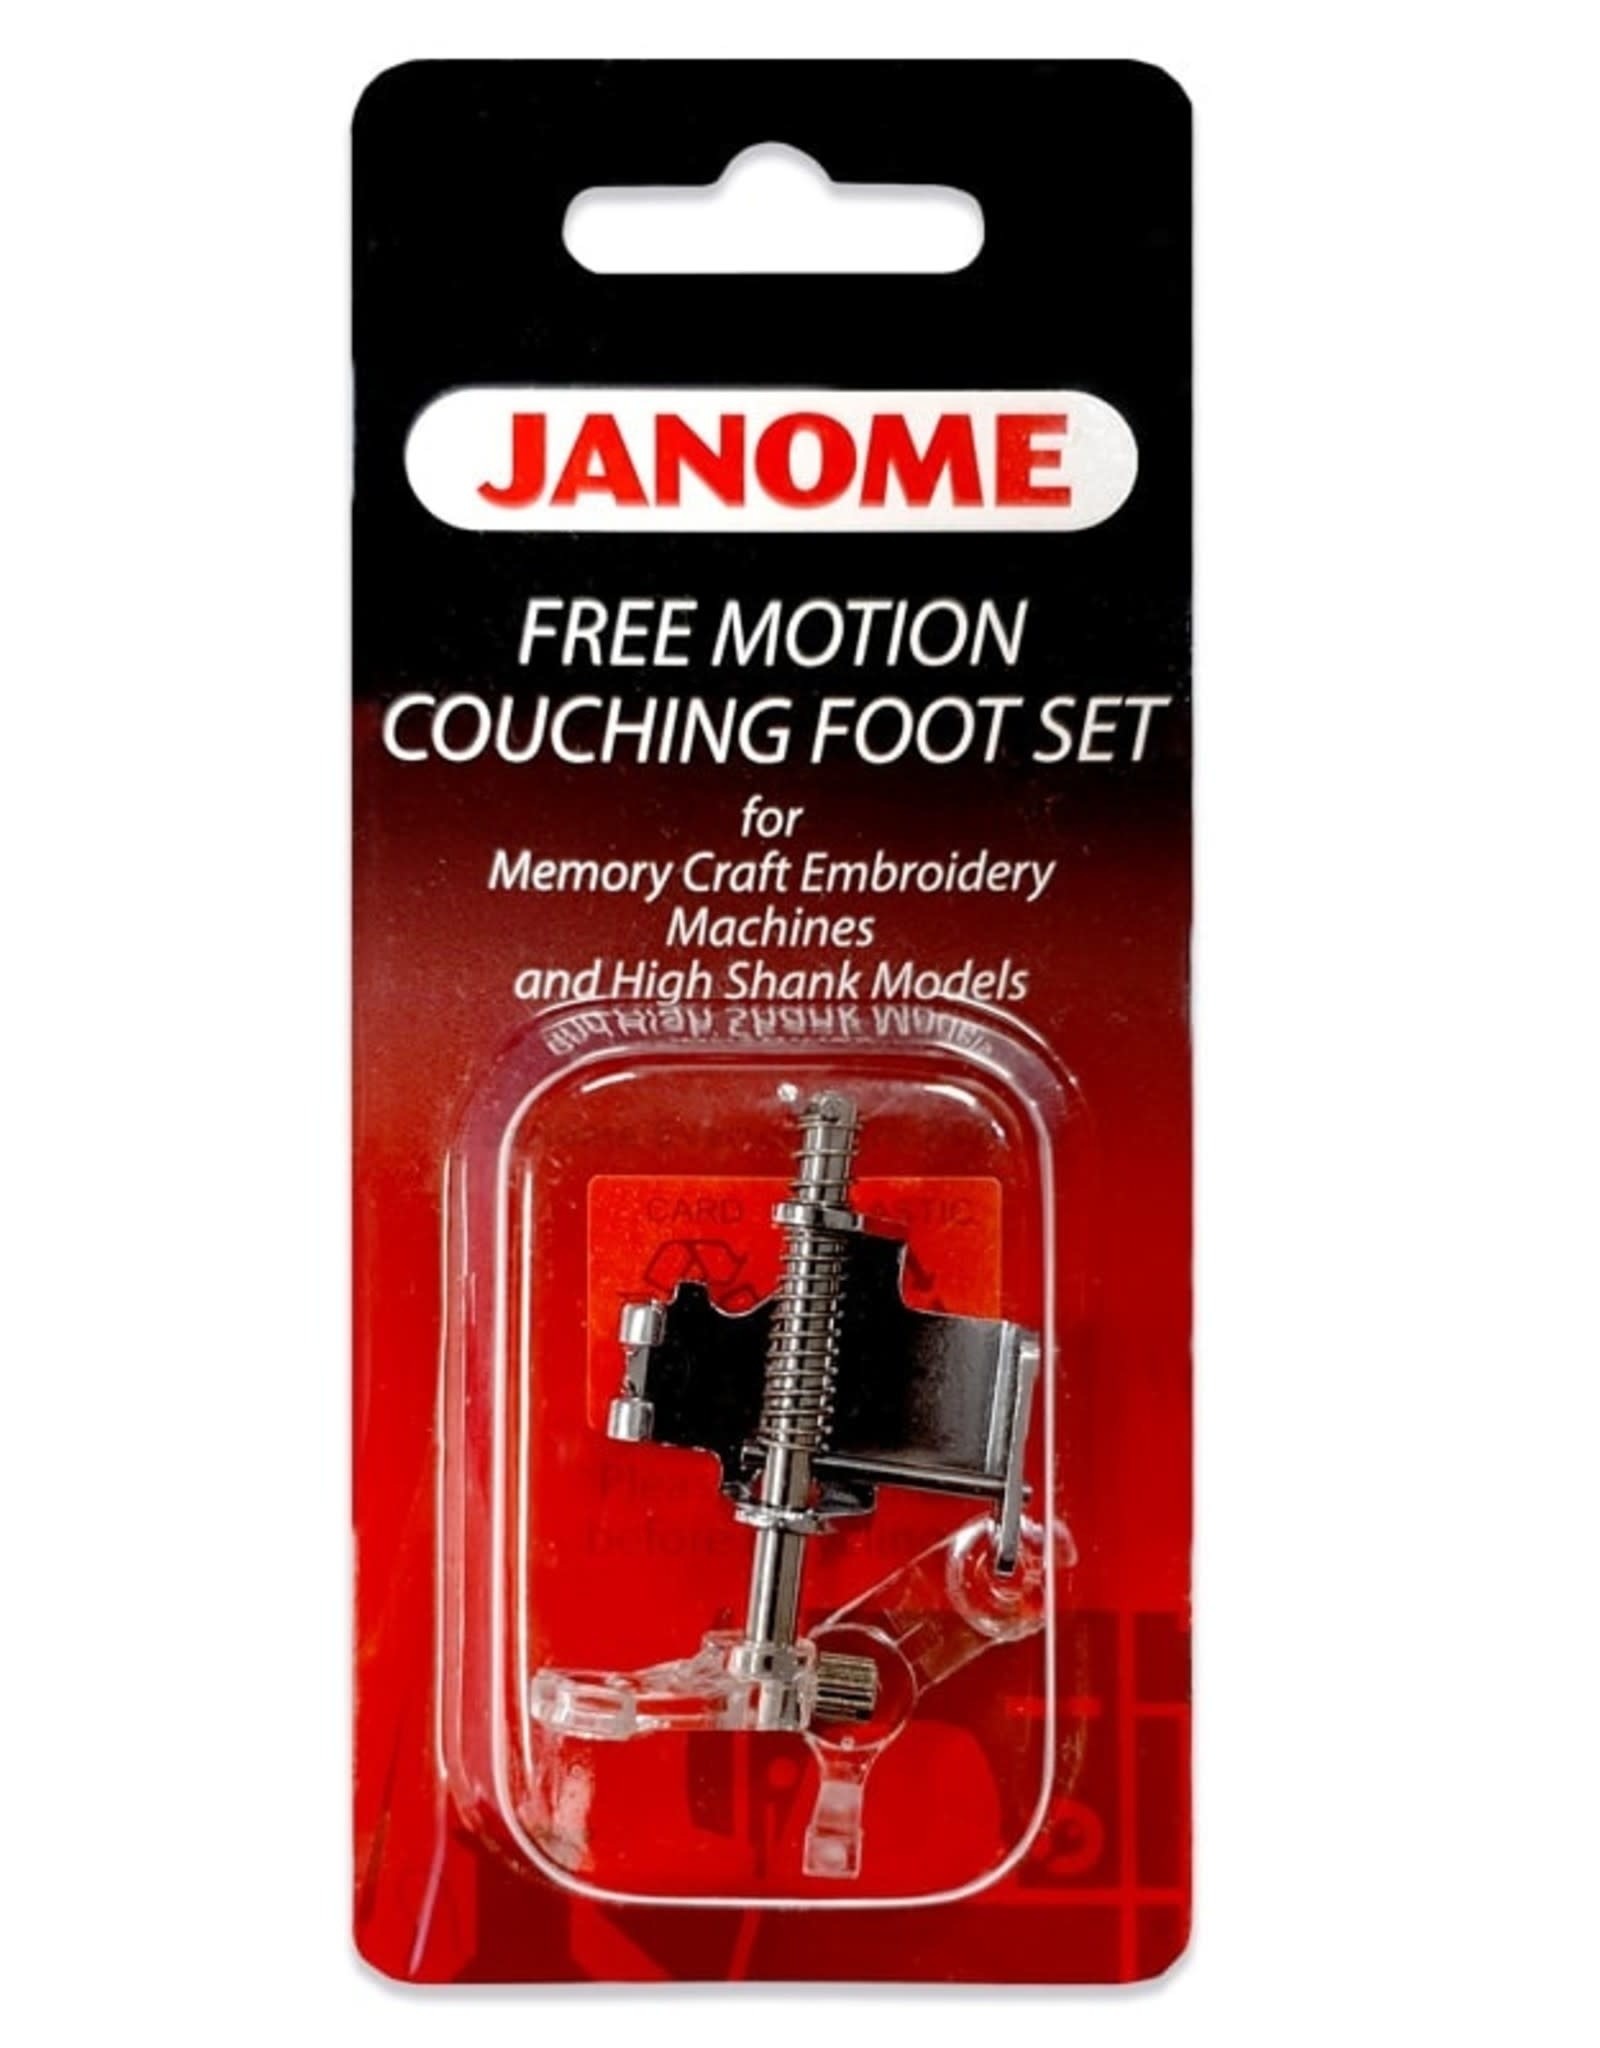 Janome Free Motion Couching Foot Set  9mm, HS, MC